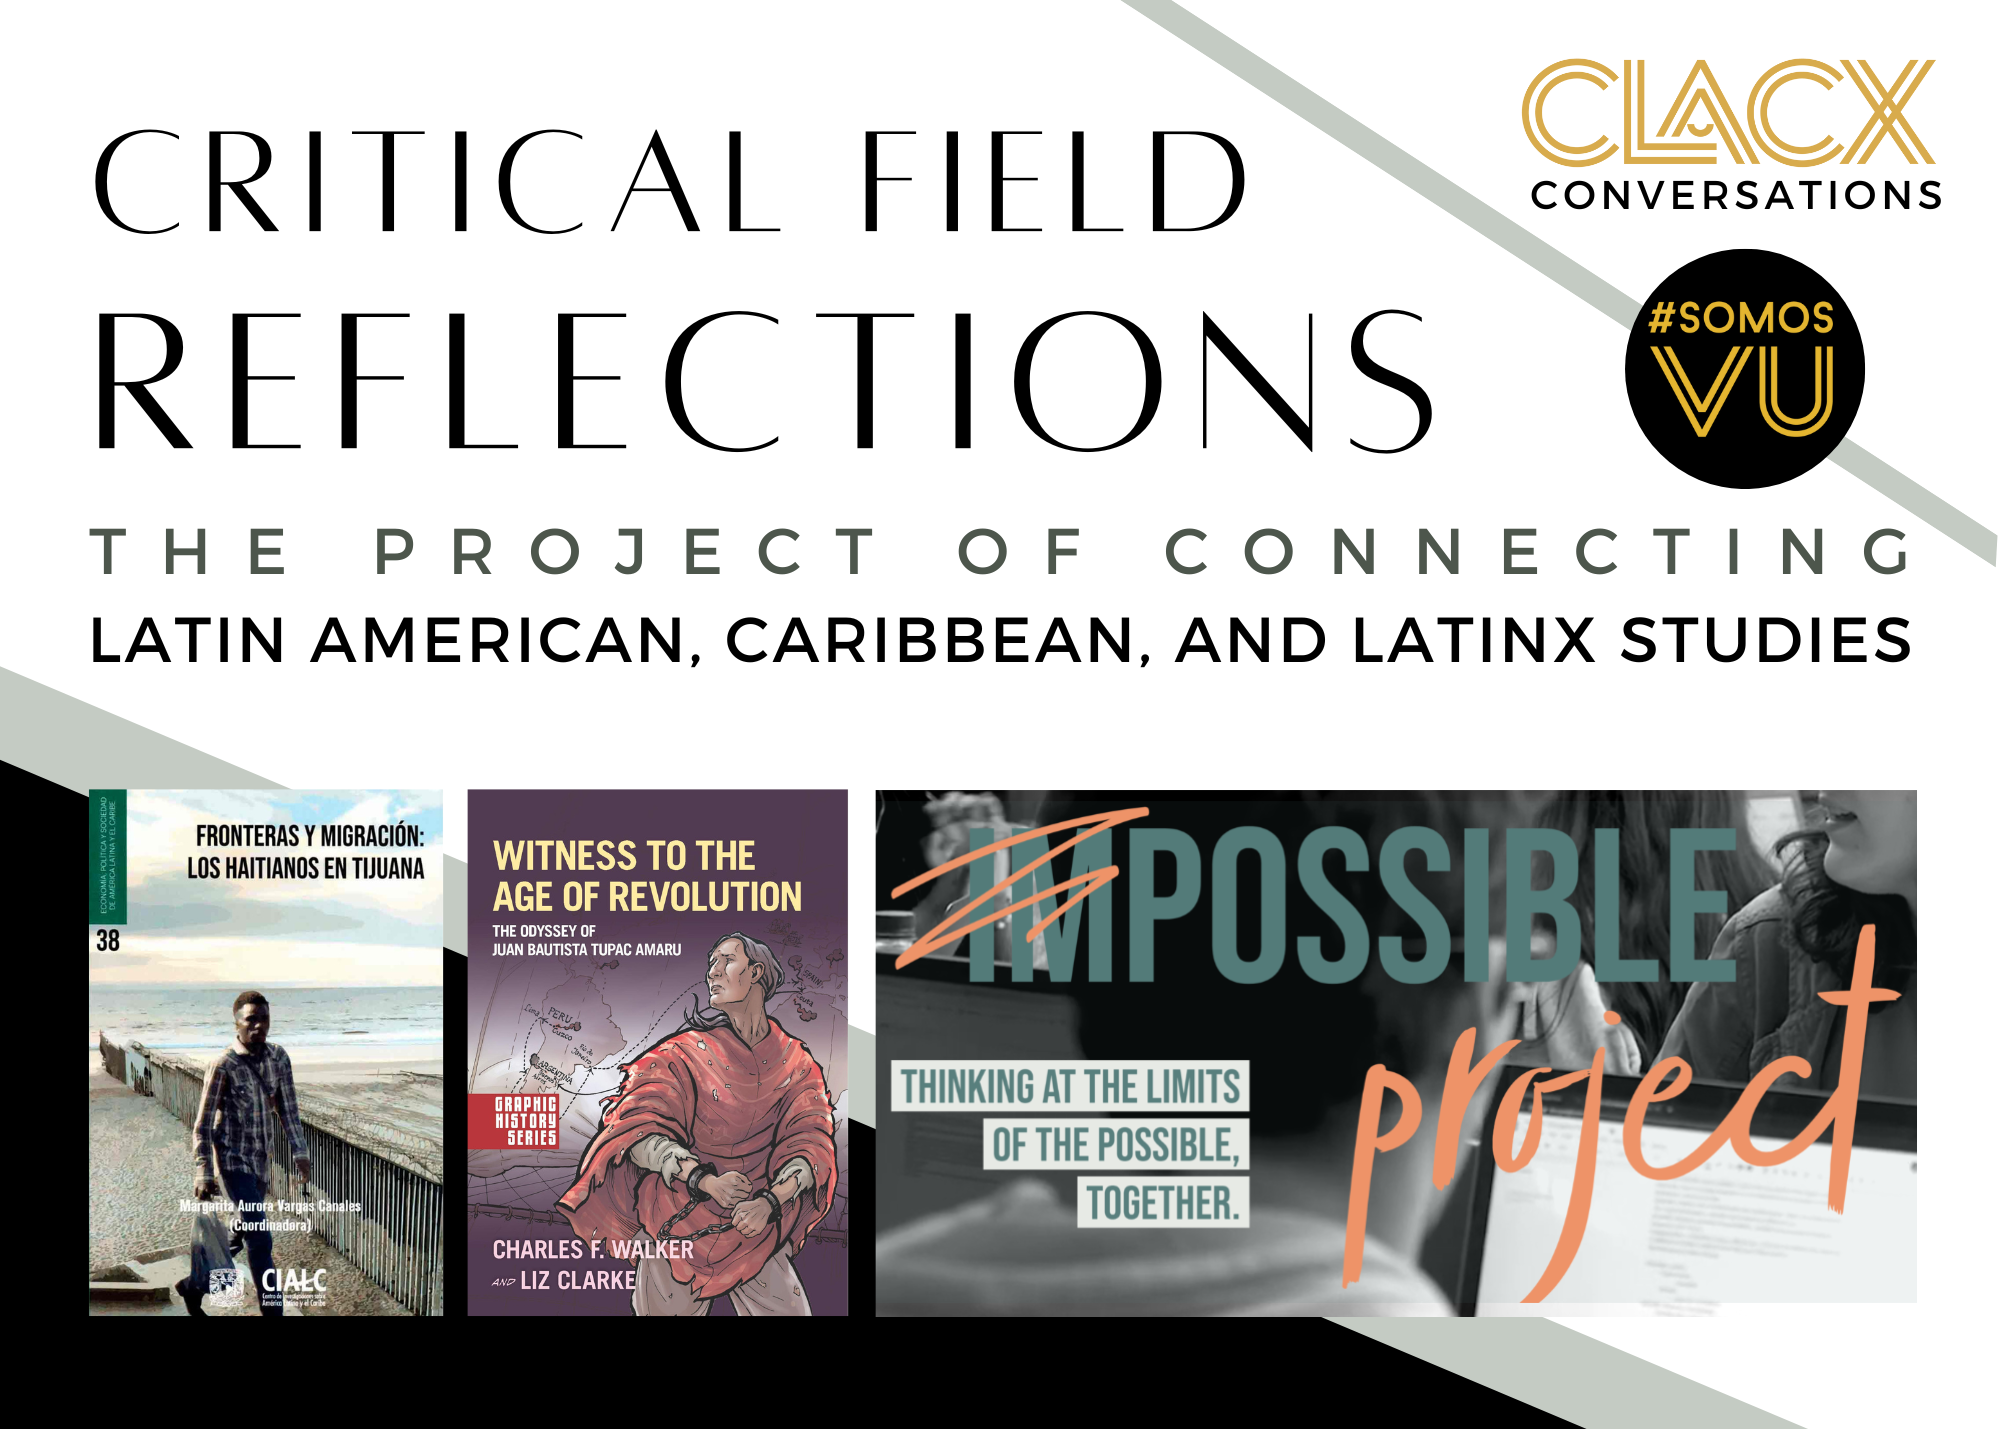 CLACX hosts “Critical Field Reflections” symposium Sept. 22-23